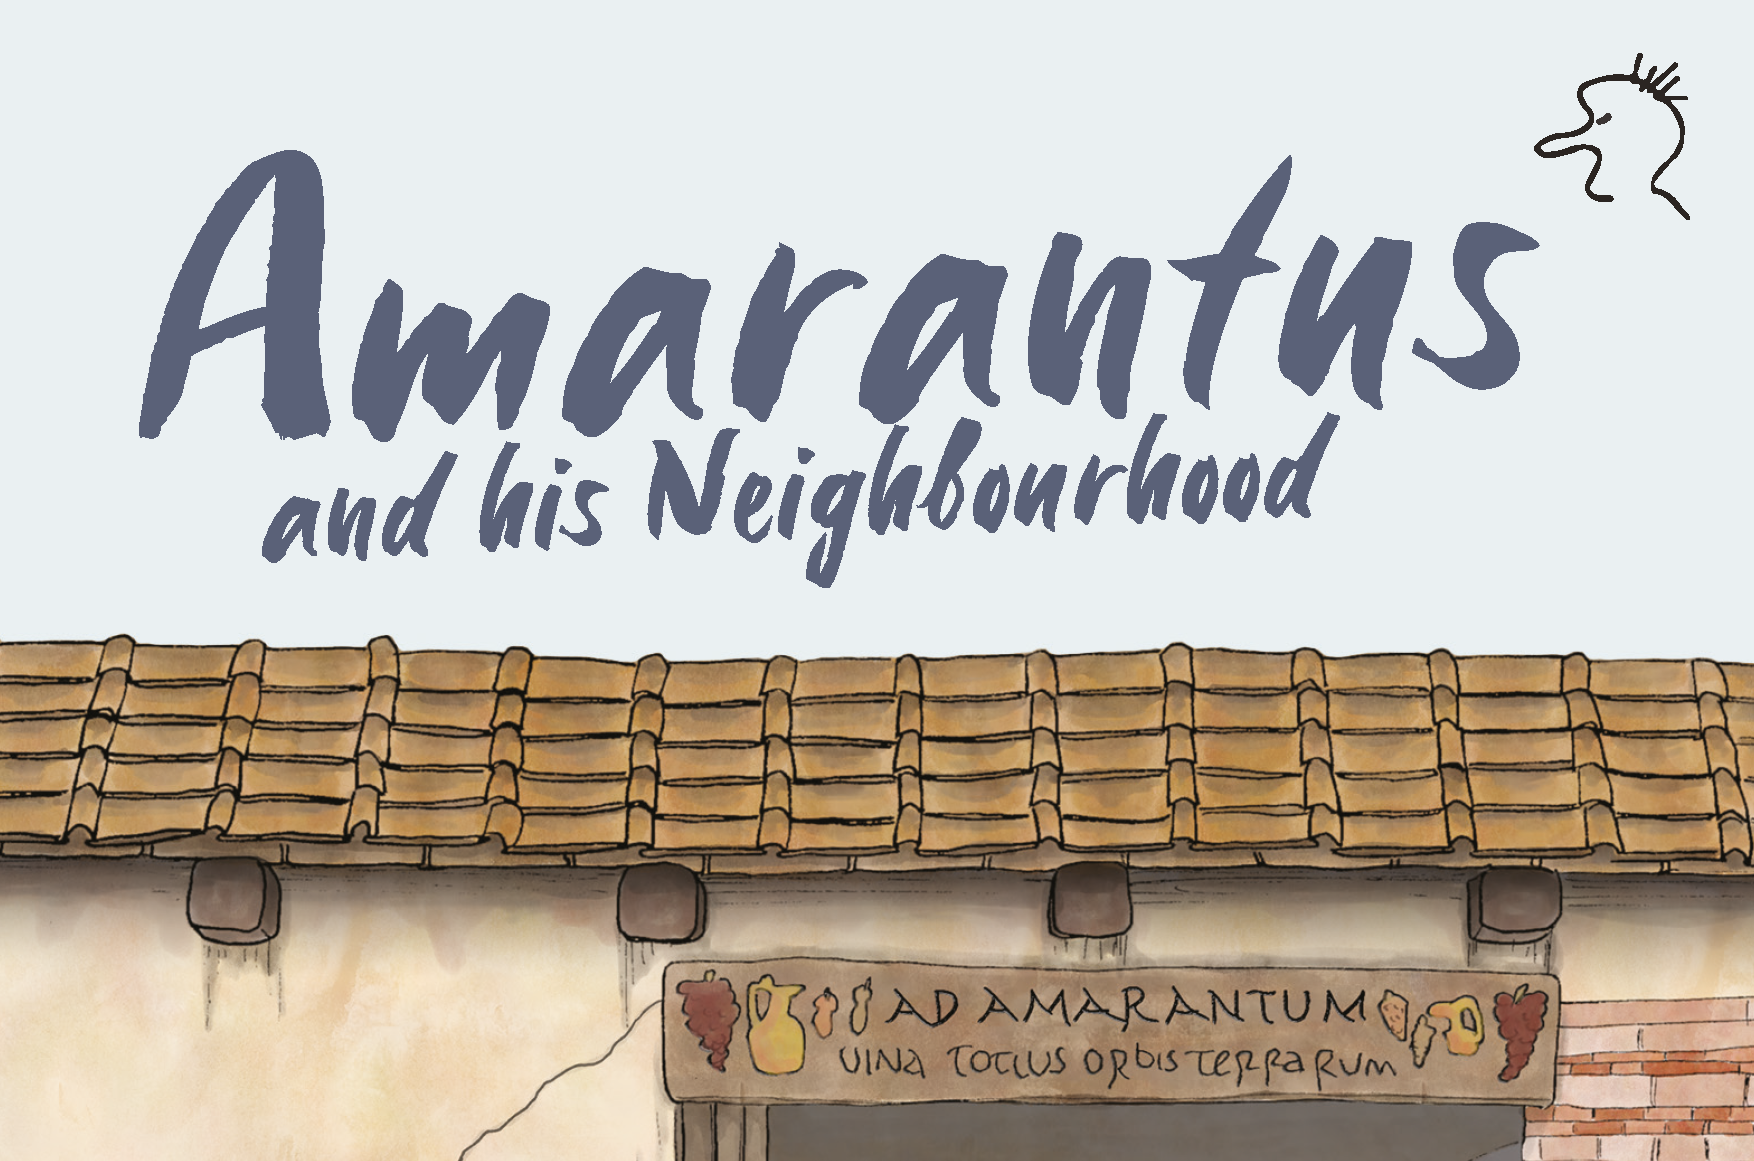 The front cover of the book 'Amarantus and his neighbourhood', featuring an illustration of a bar filled with characters from the book.